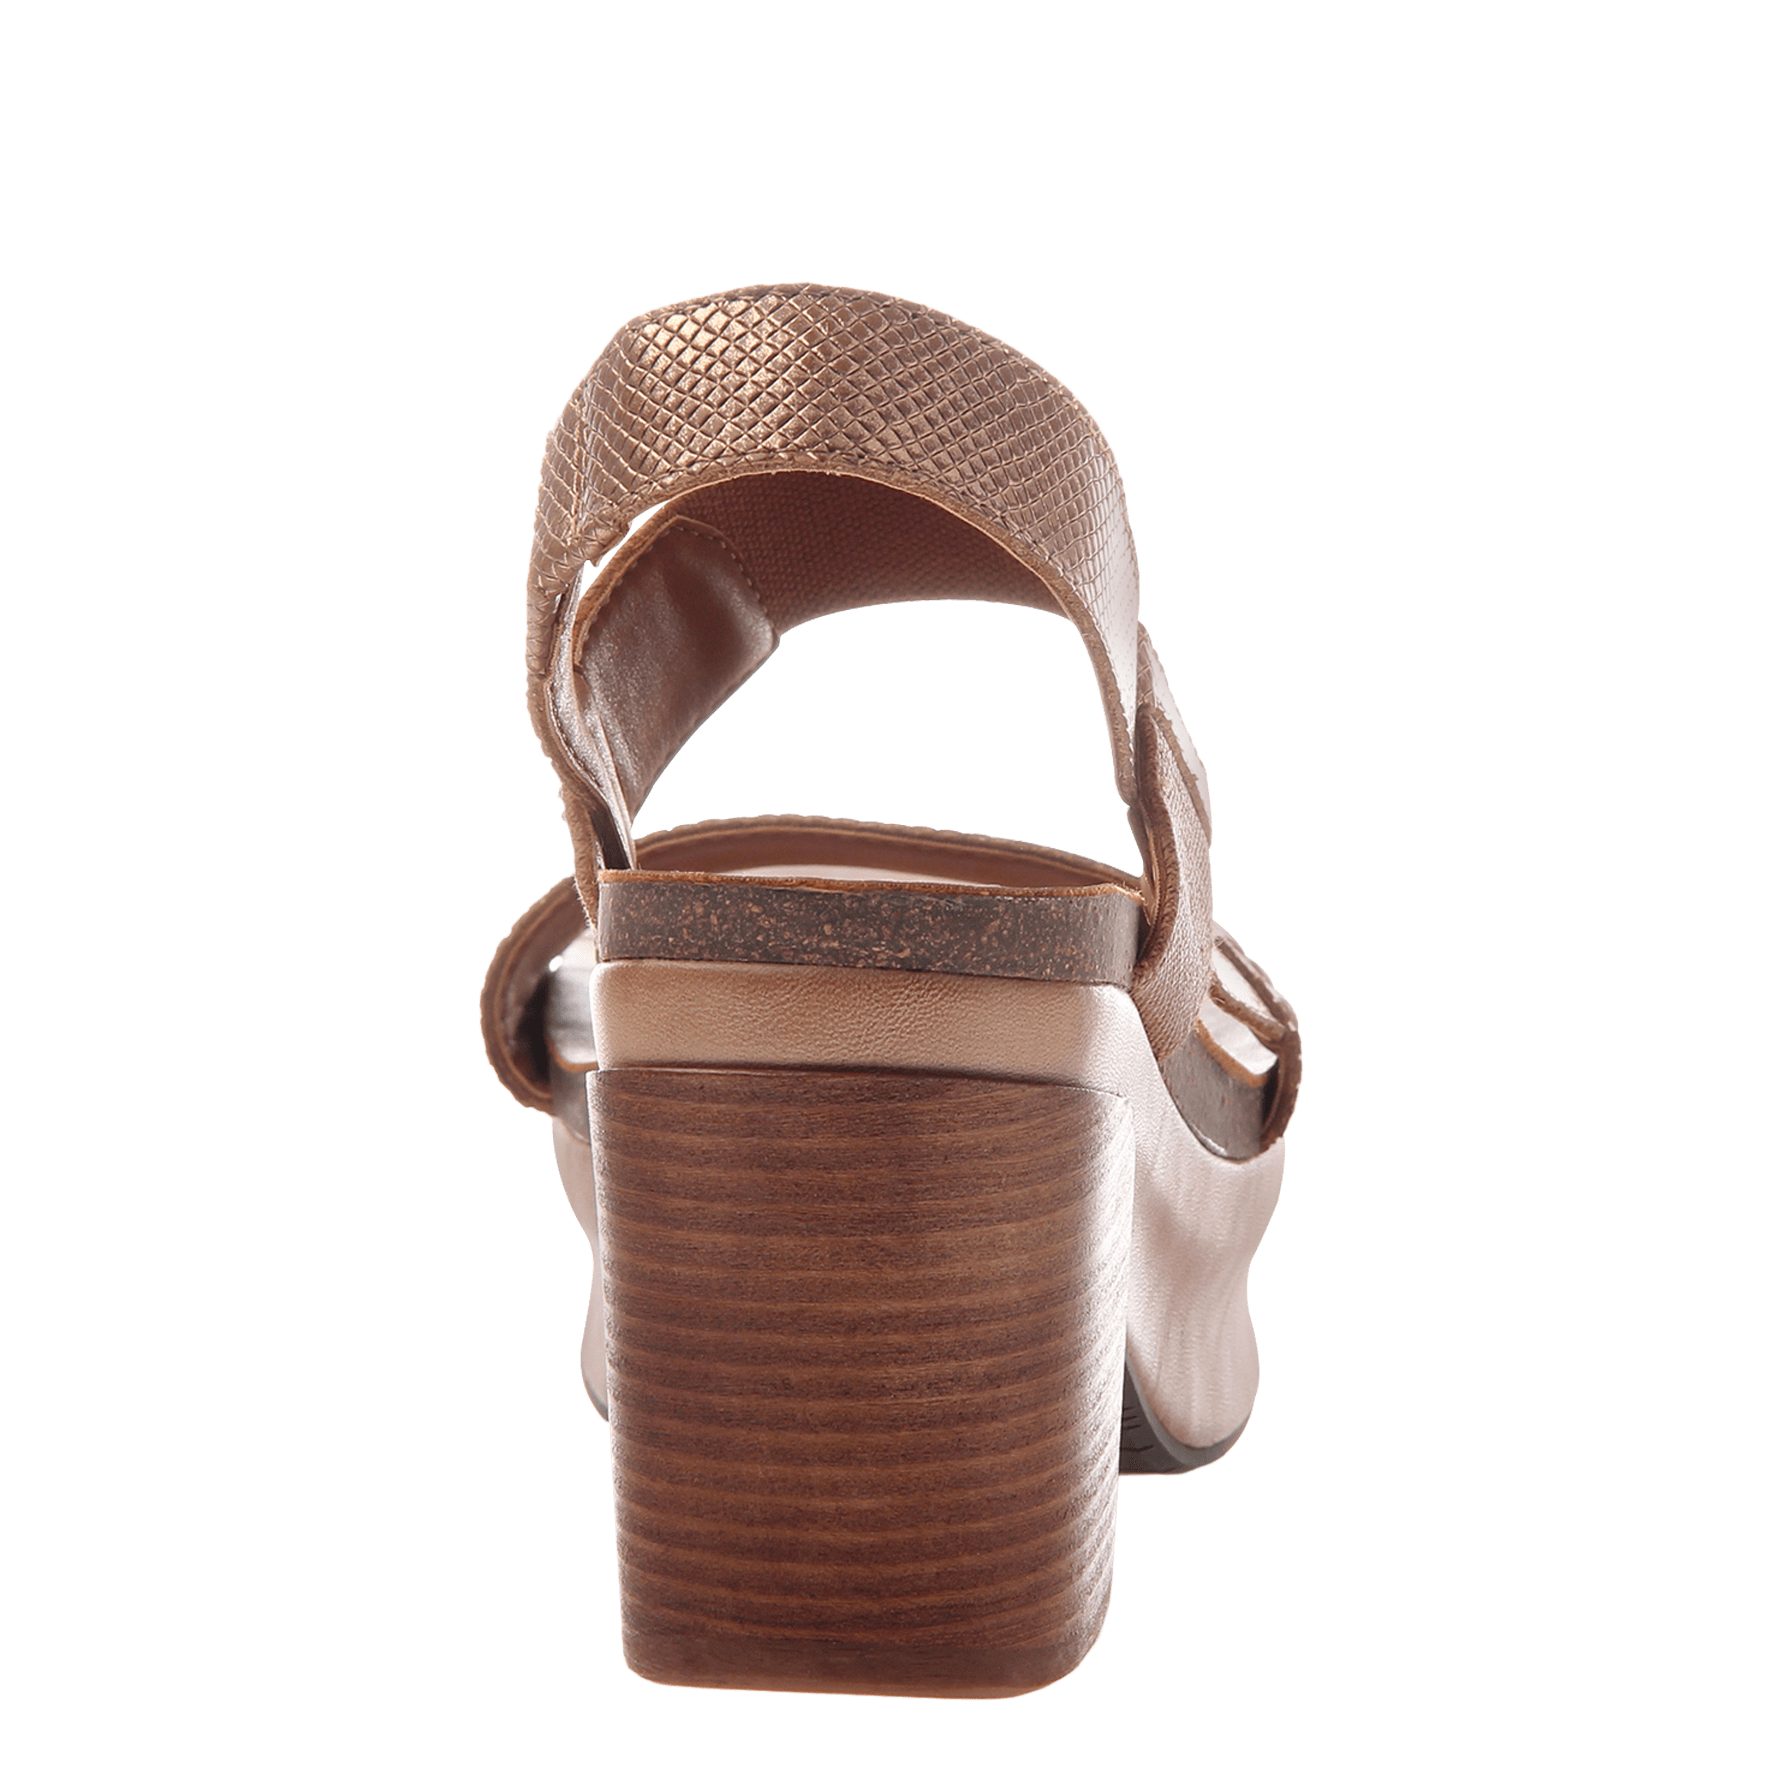 Indio in Copper Wedge Sandals | Women's Shoes by OTBT